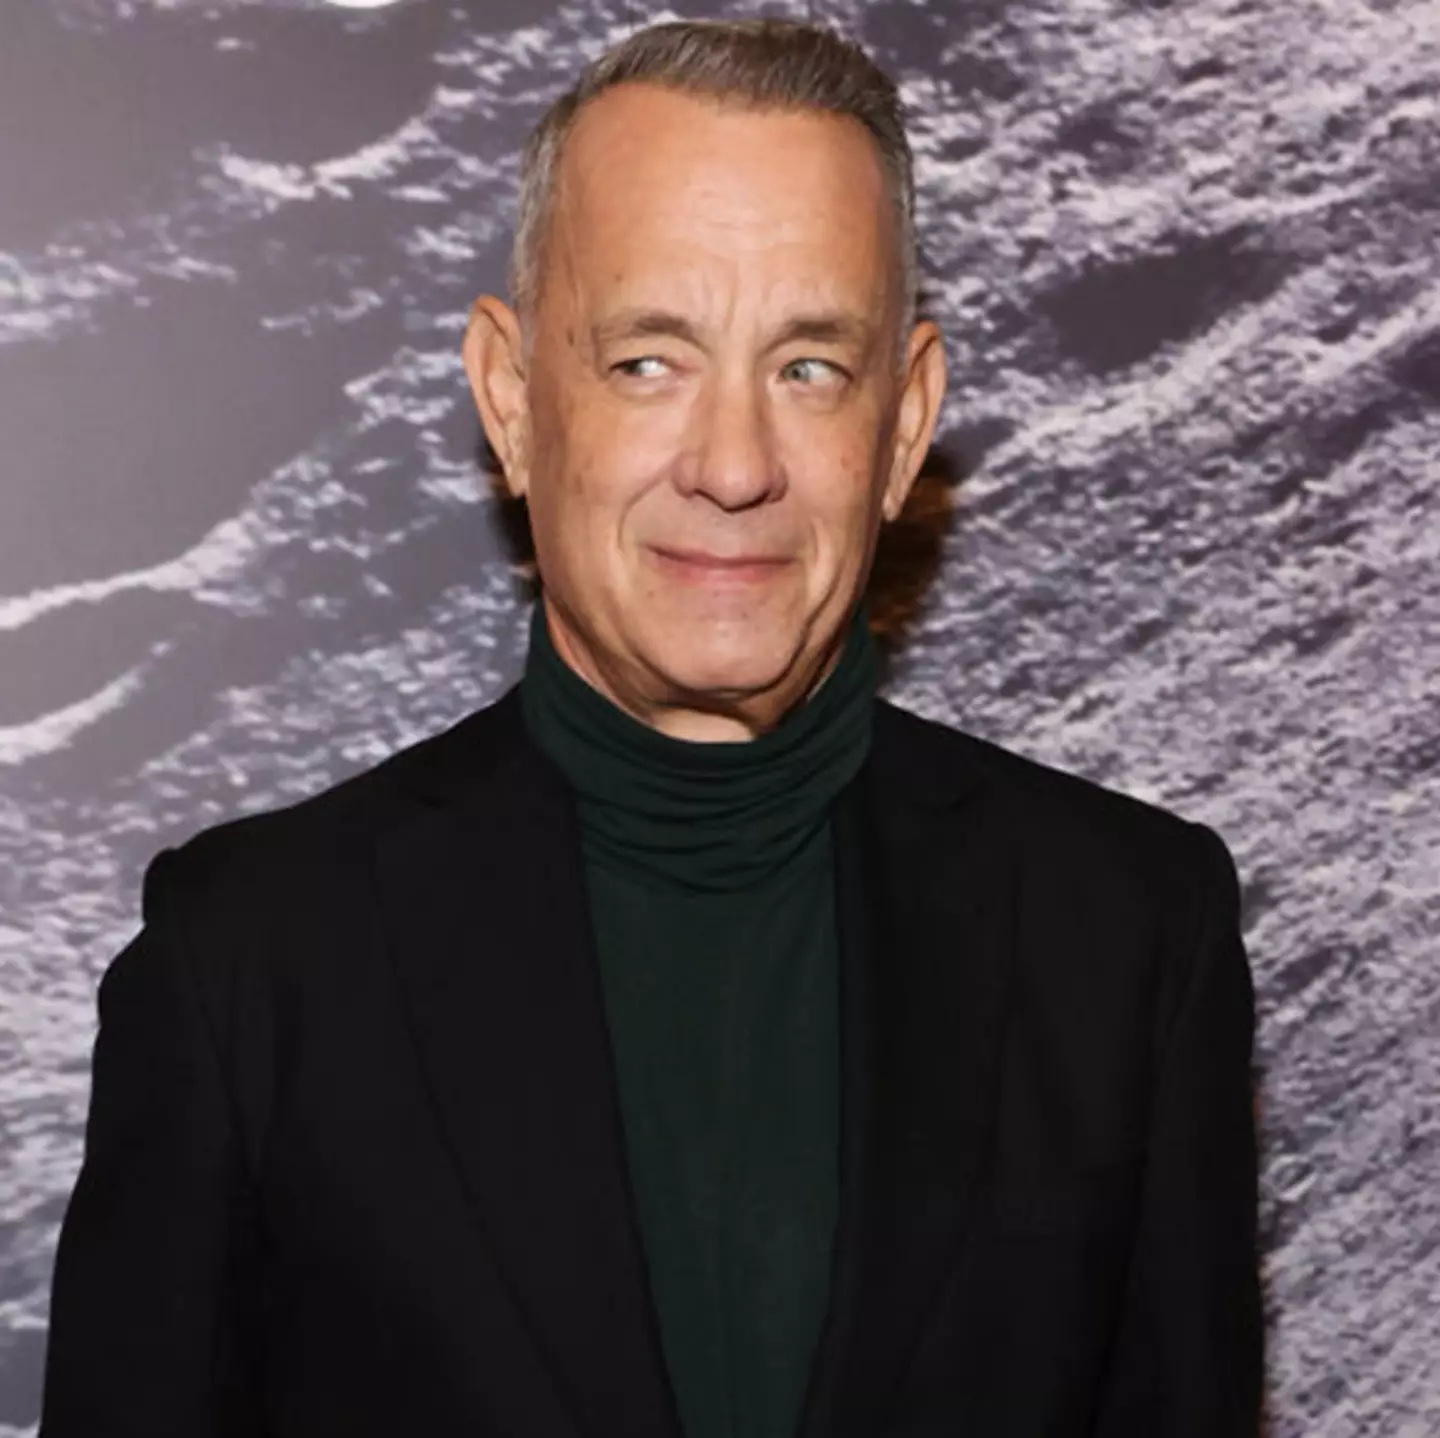 Tom Hanks on why he wants to live on the asteroid named after him